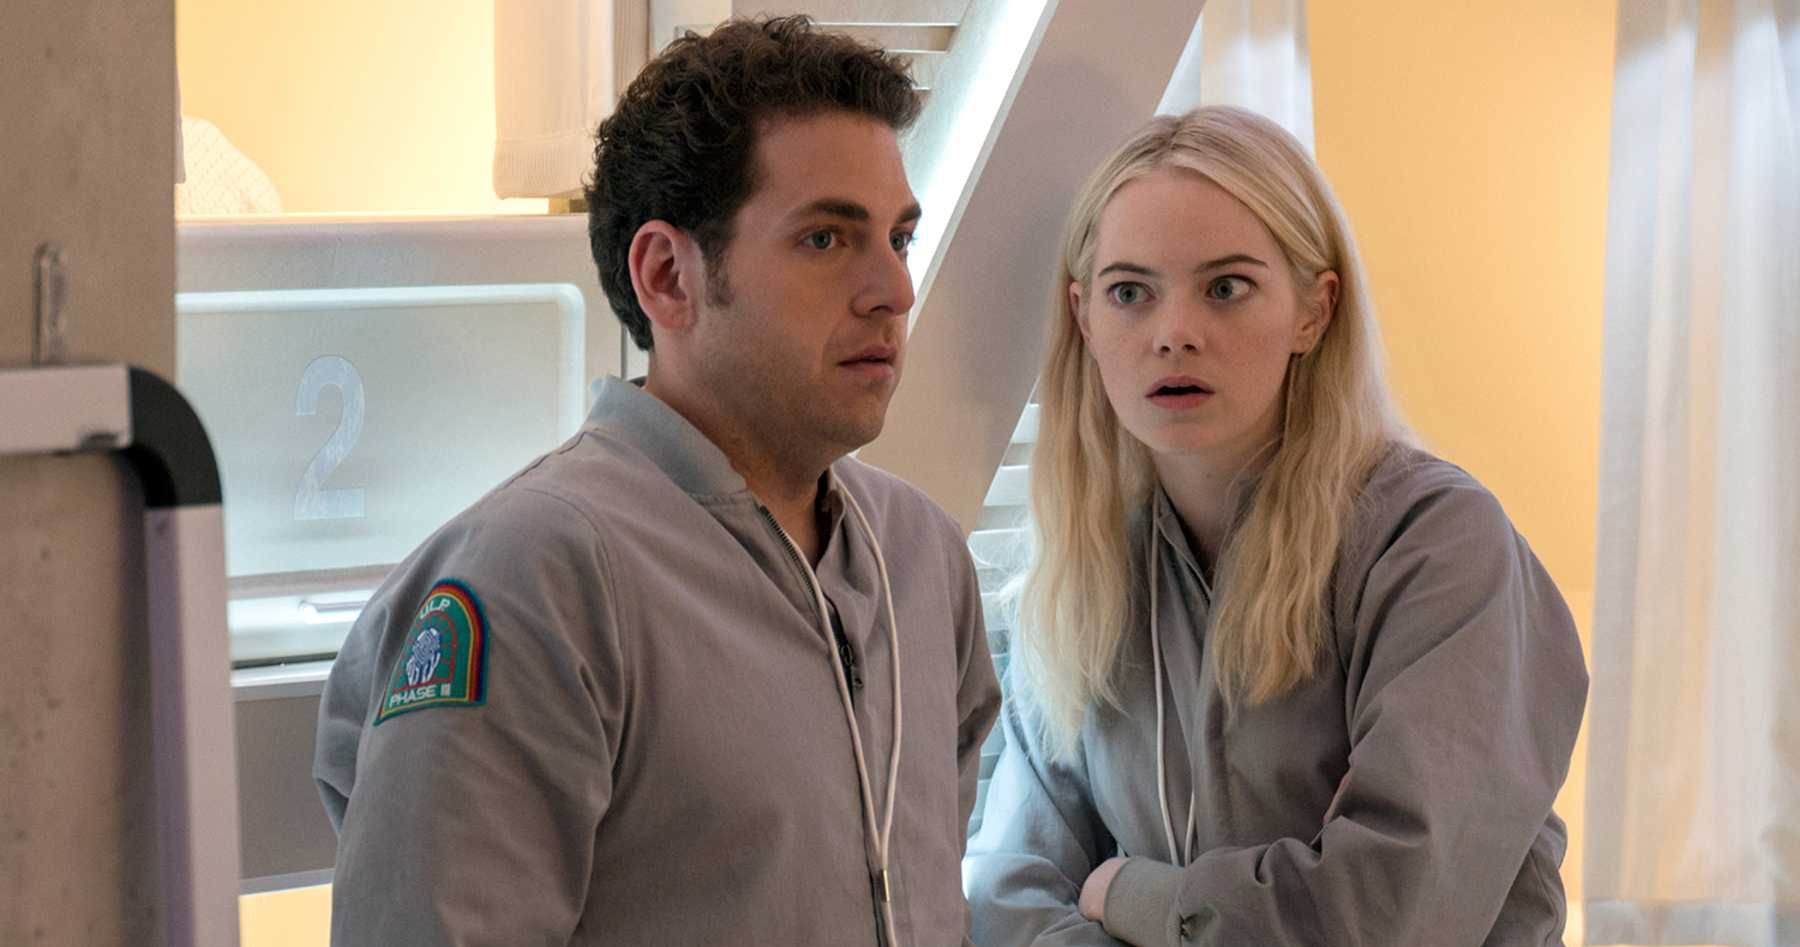 Jonah Hill Is Unrecognizable On Set of New Netflix Series Maniac